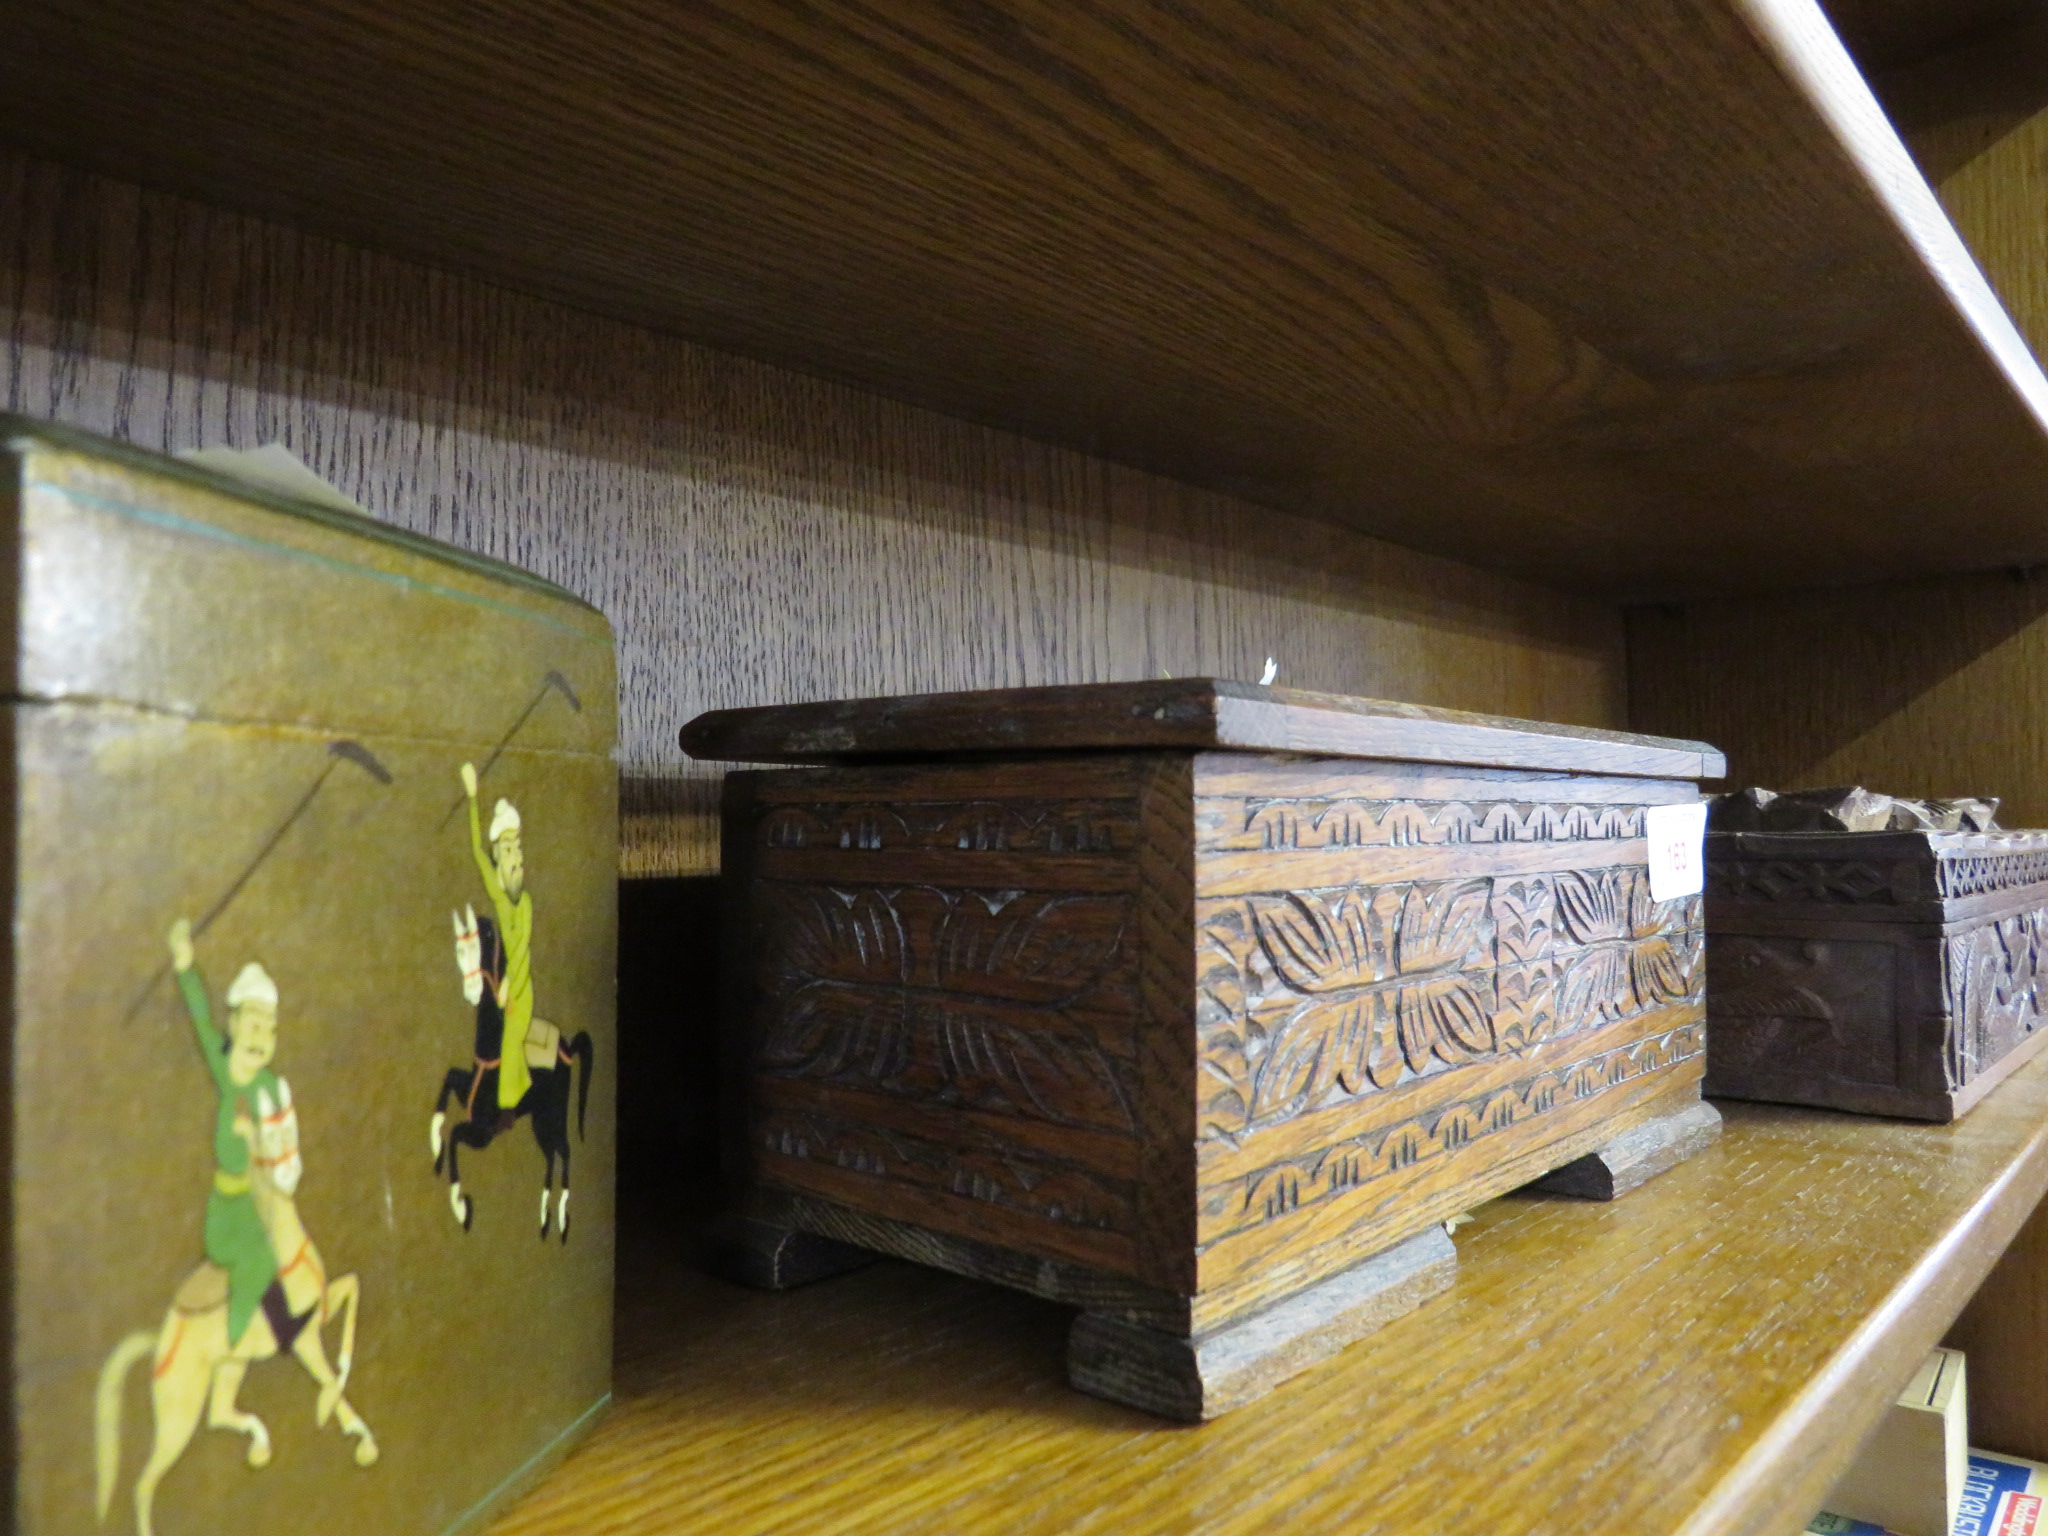 TWO CARVED WOODEN CIGARETTE BOXES, TOGETHER WITH PLAYING CARDS BOX.